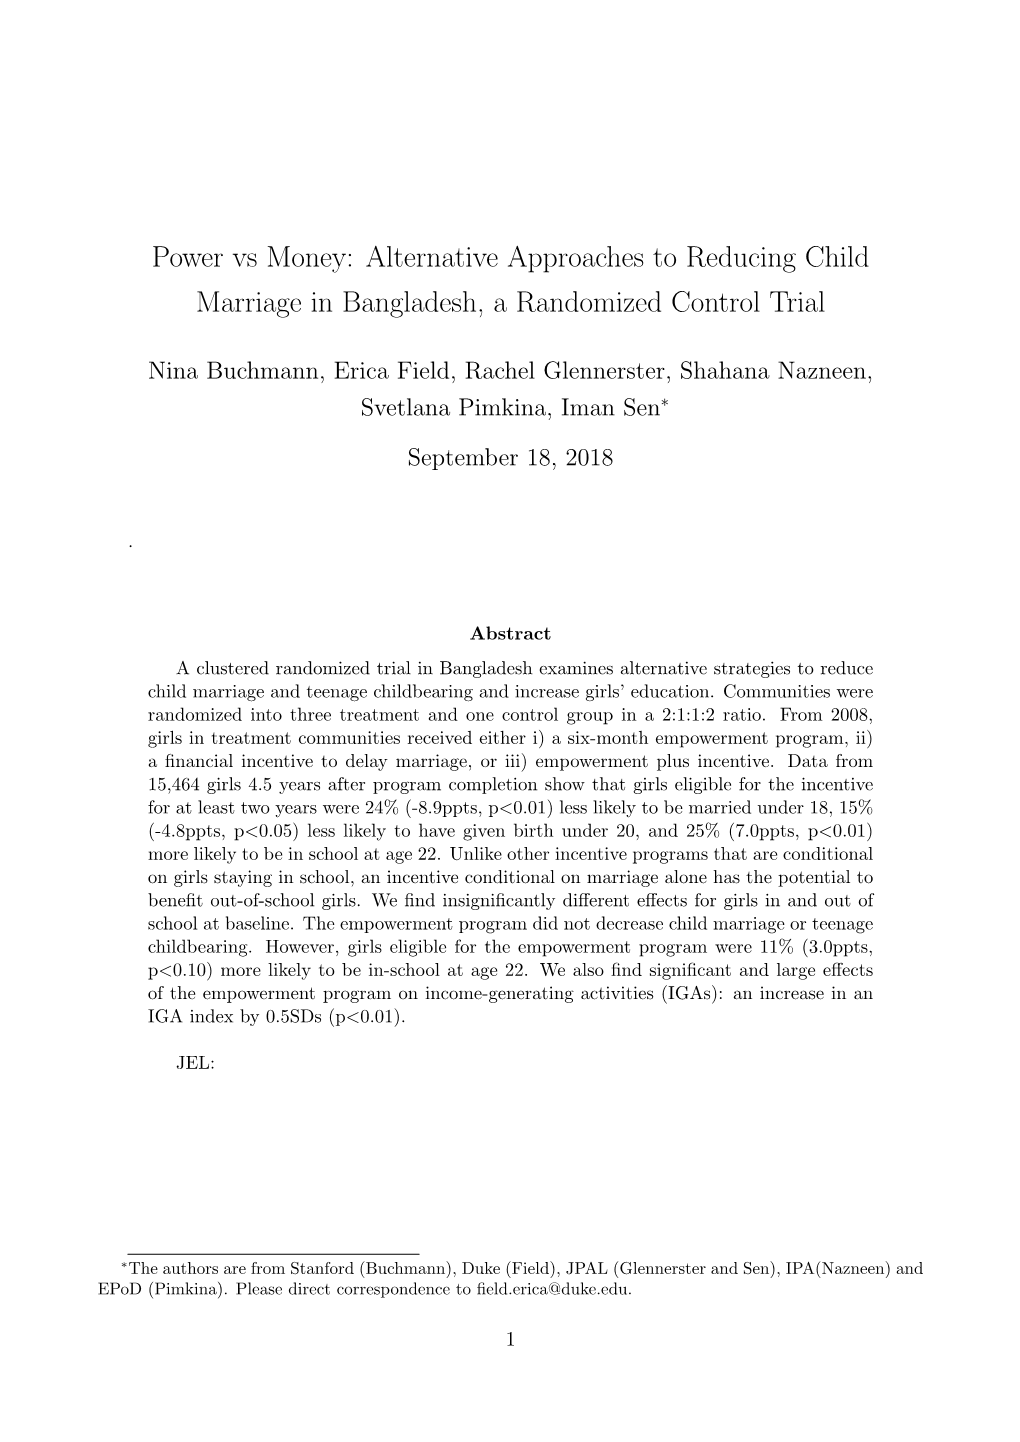 Alternative Approaches to Reducing Child Marriage in Bangladesh, a Randomized Control Trial